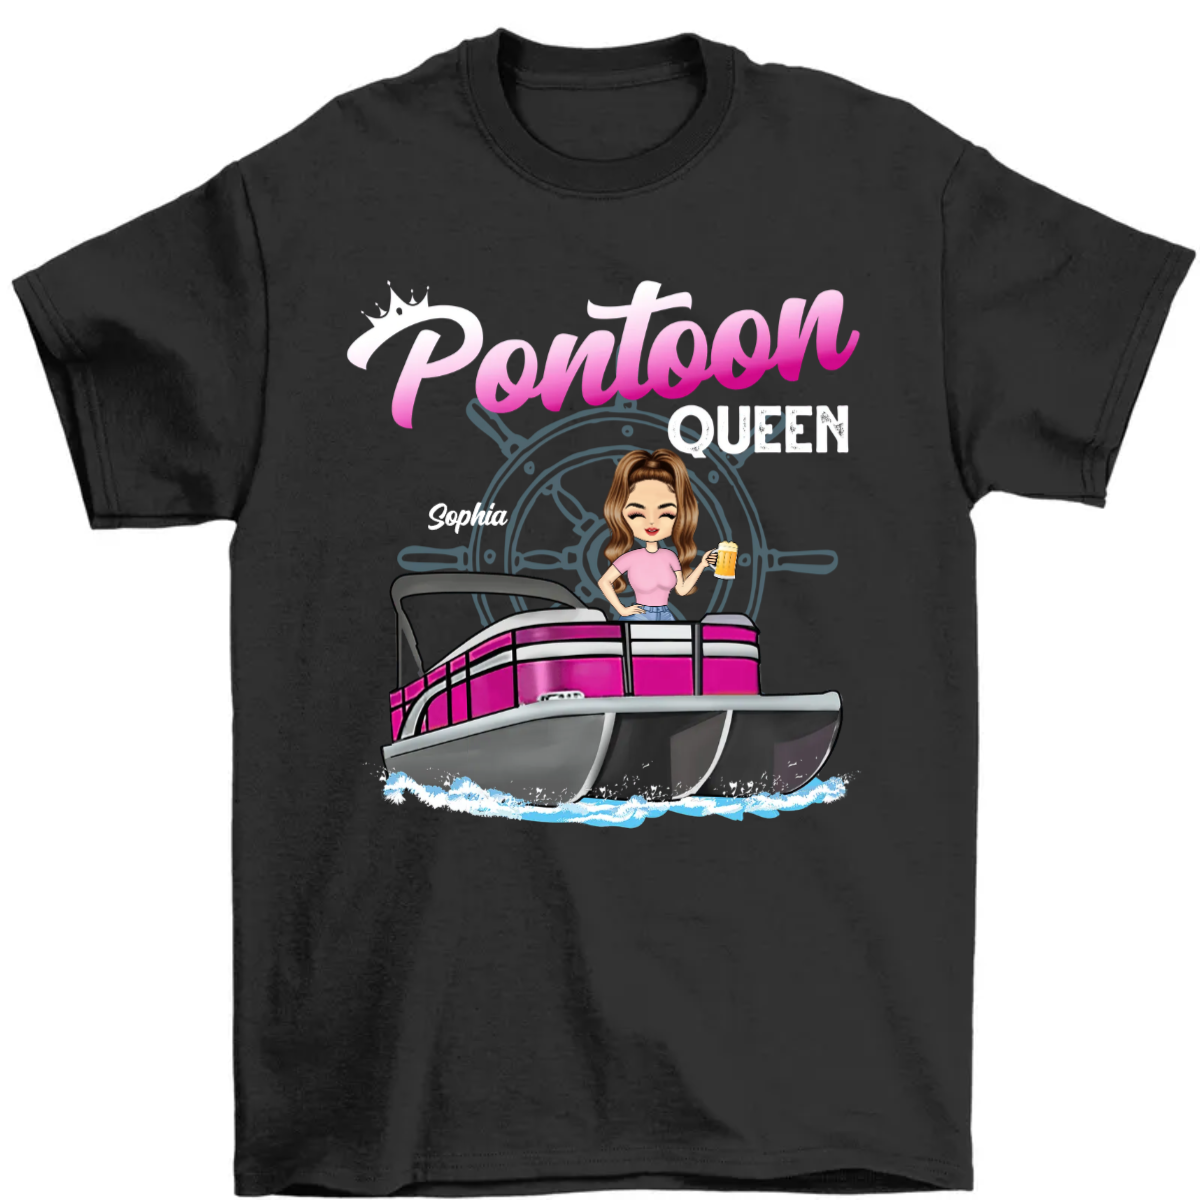 Boating Pontoon Queen - Birthday Gift For Pontooning Lovers, Lake Lovers, Travelers, Women - Personalized Custom T Shirt